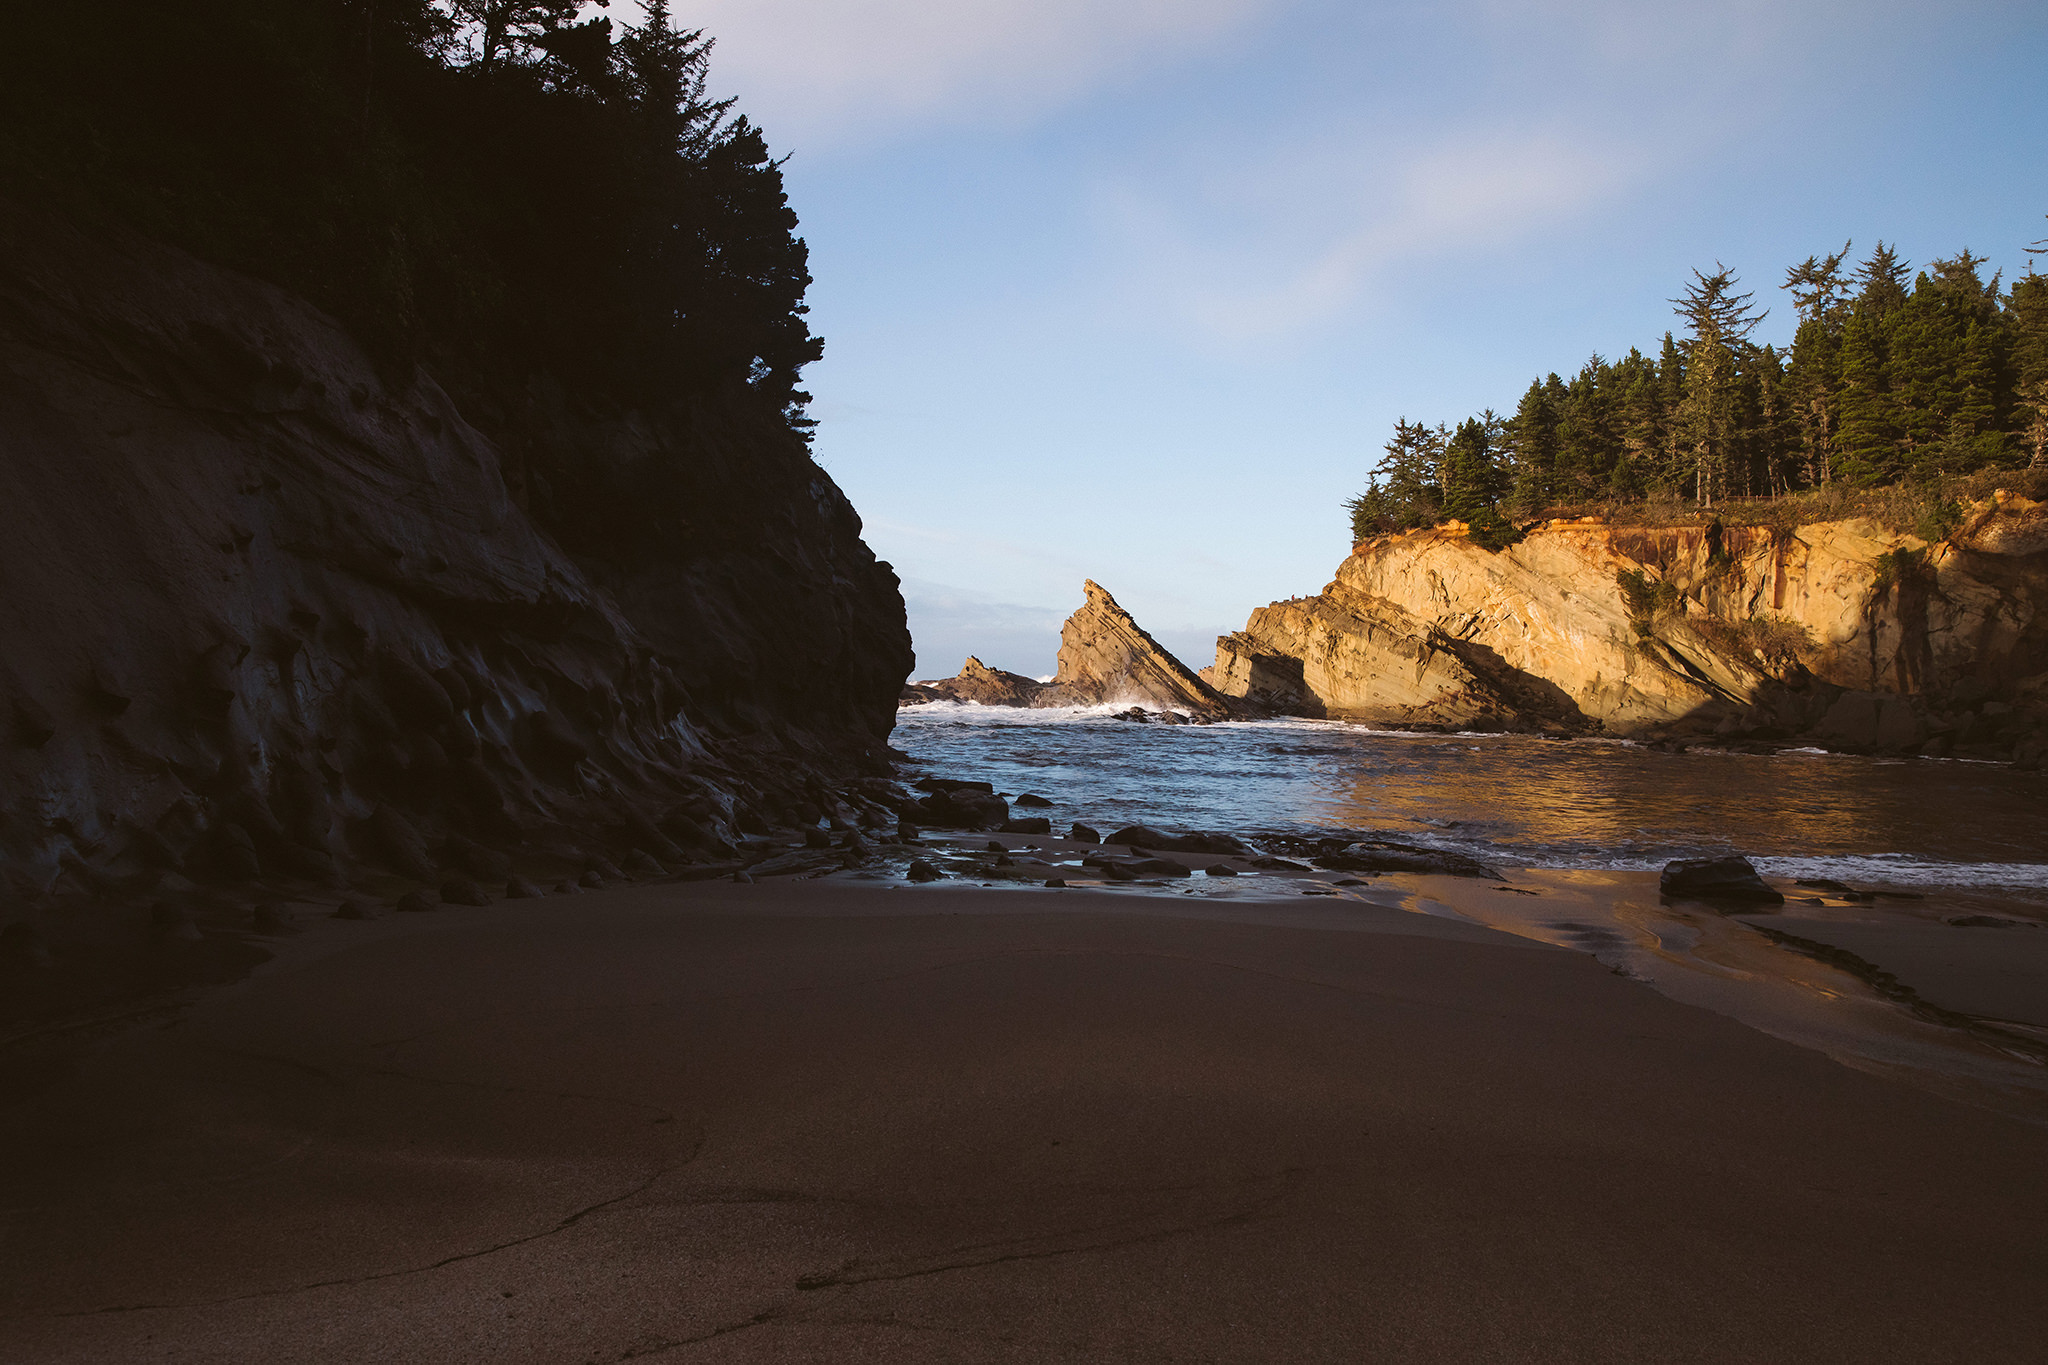 A cliffside beach in Coos Bay, Oregon at Shore Acres state park